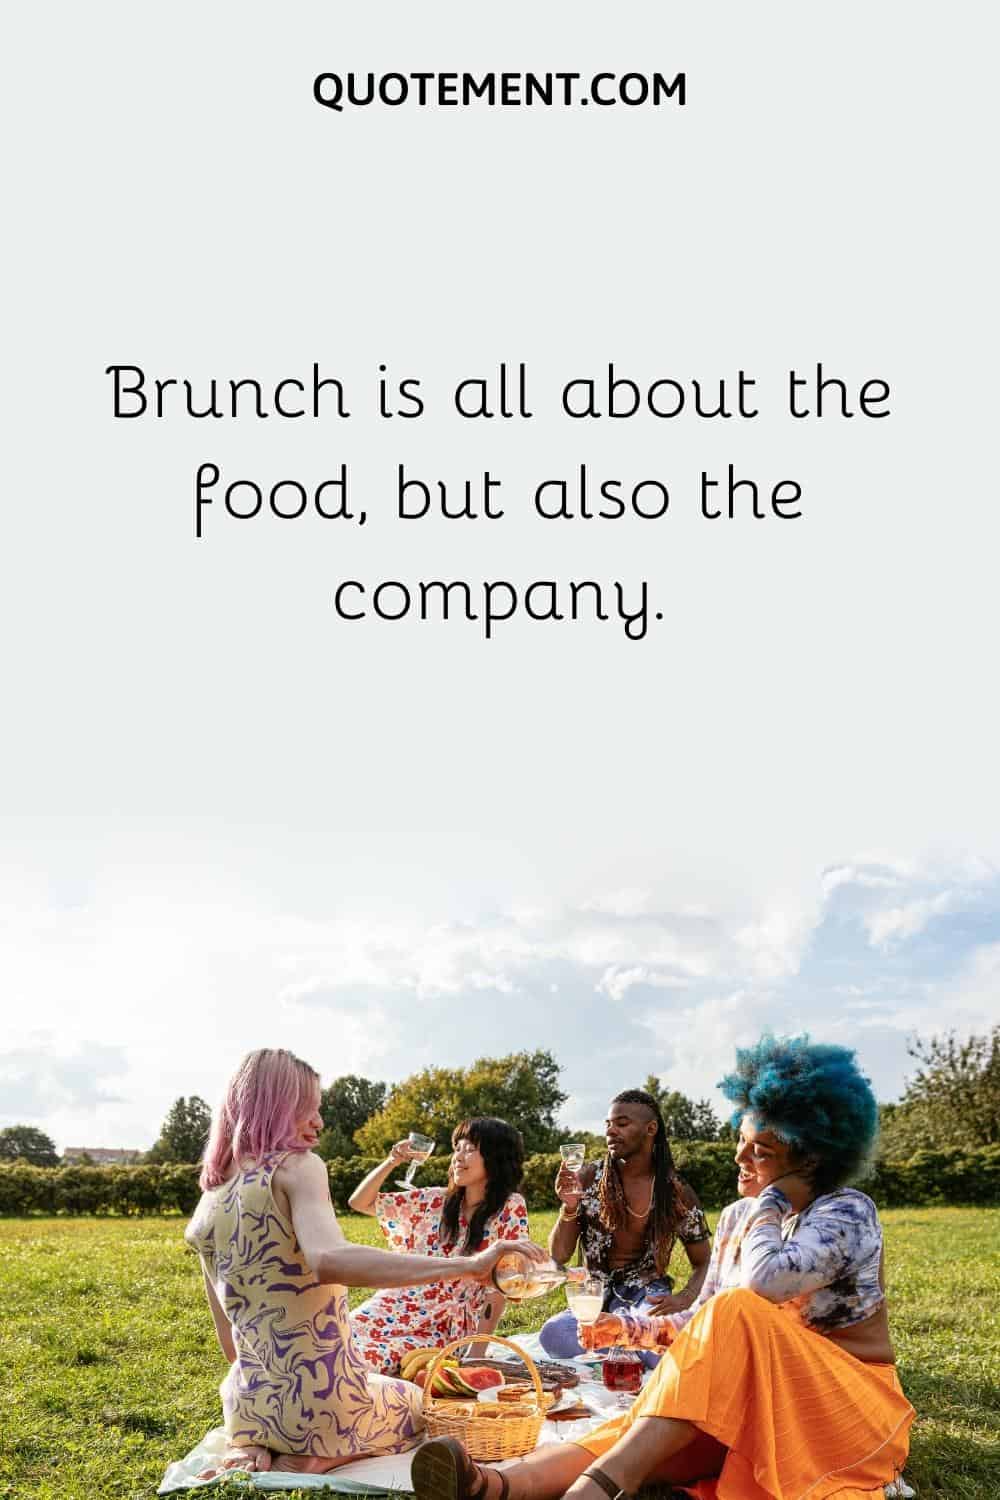 Brunch is all about the food, but also the company.